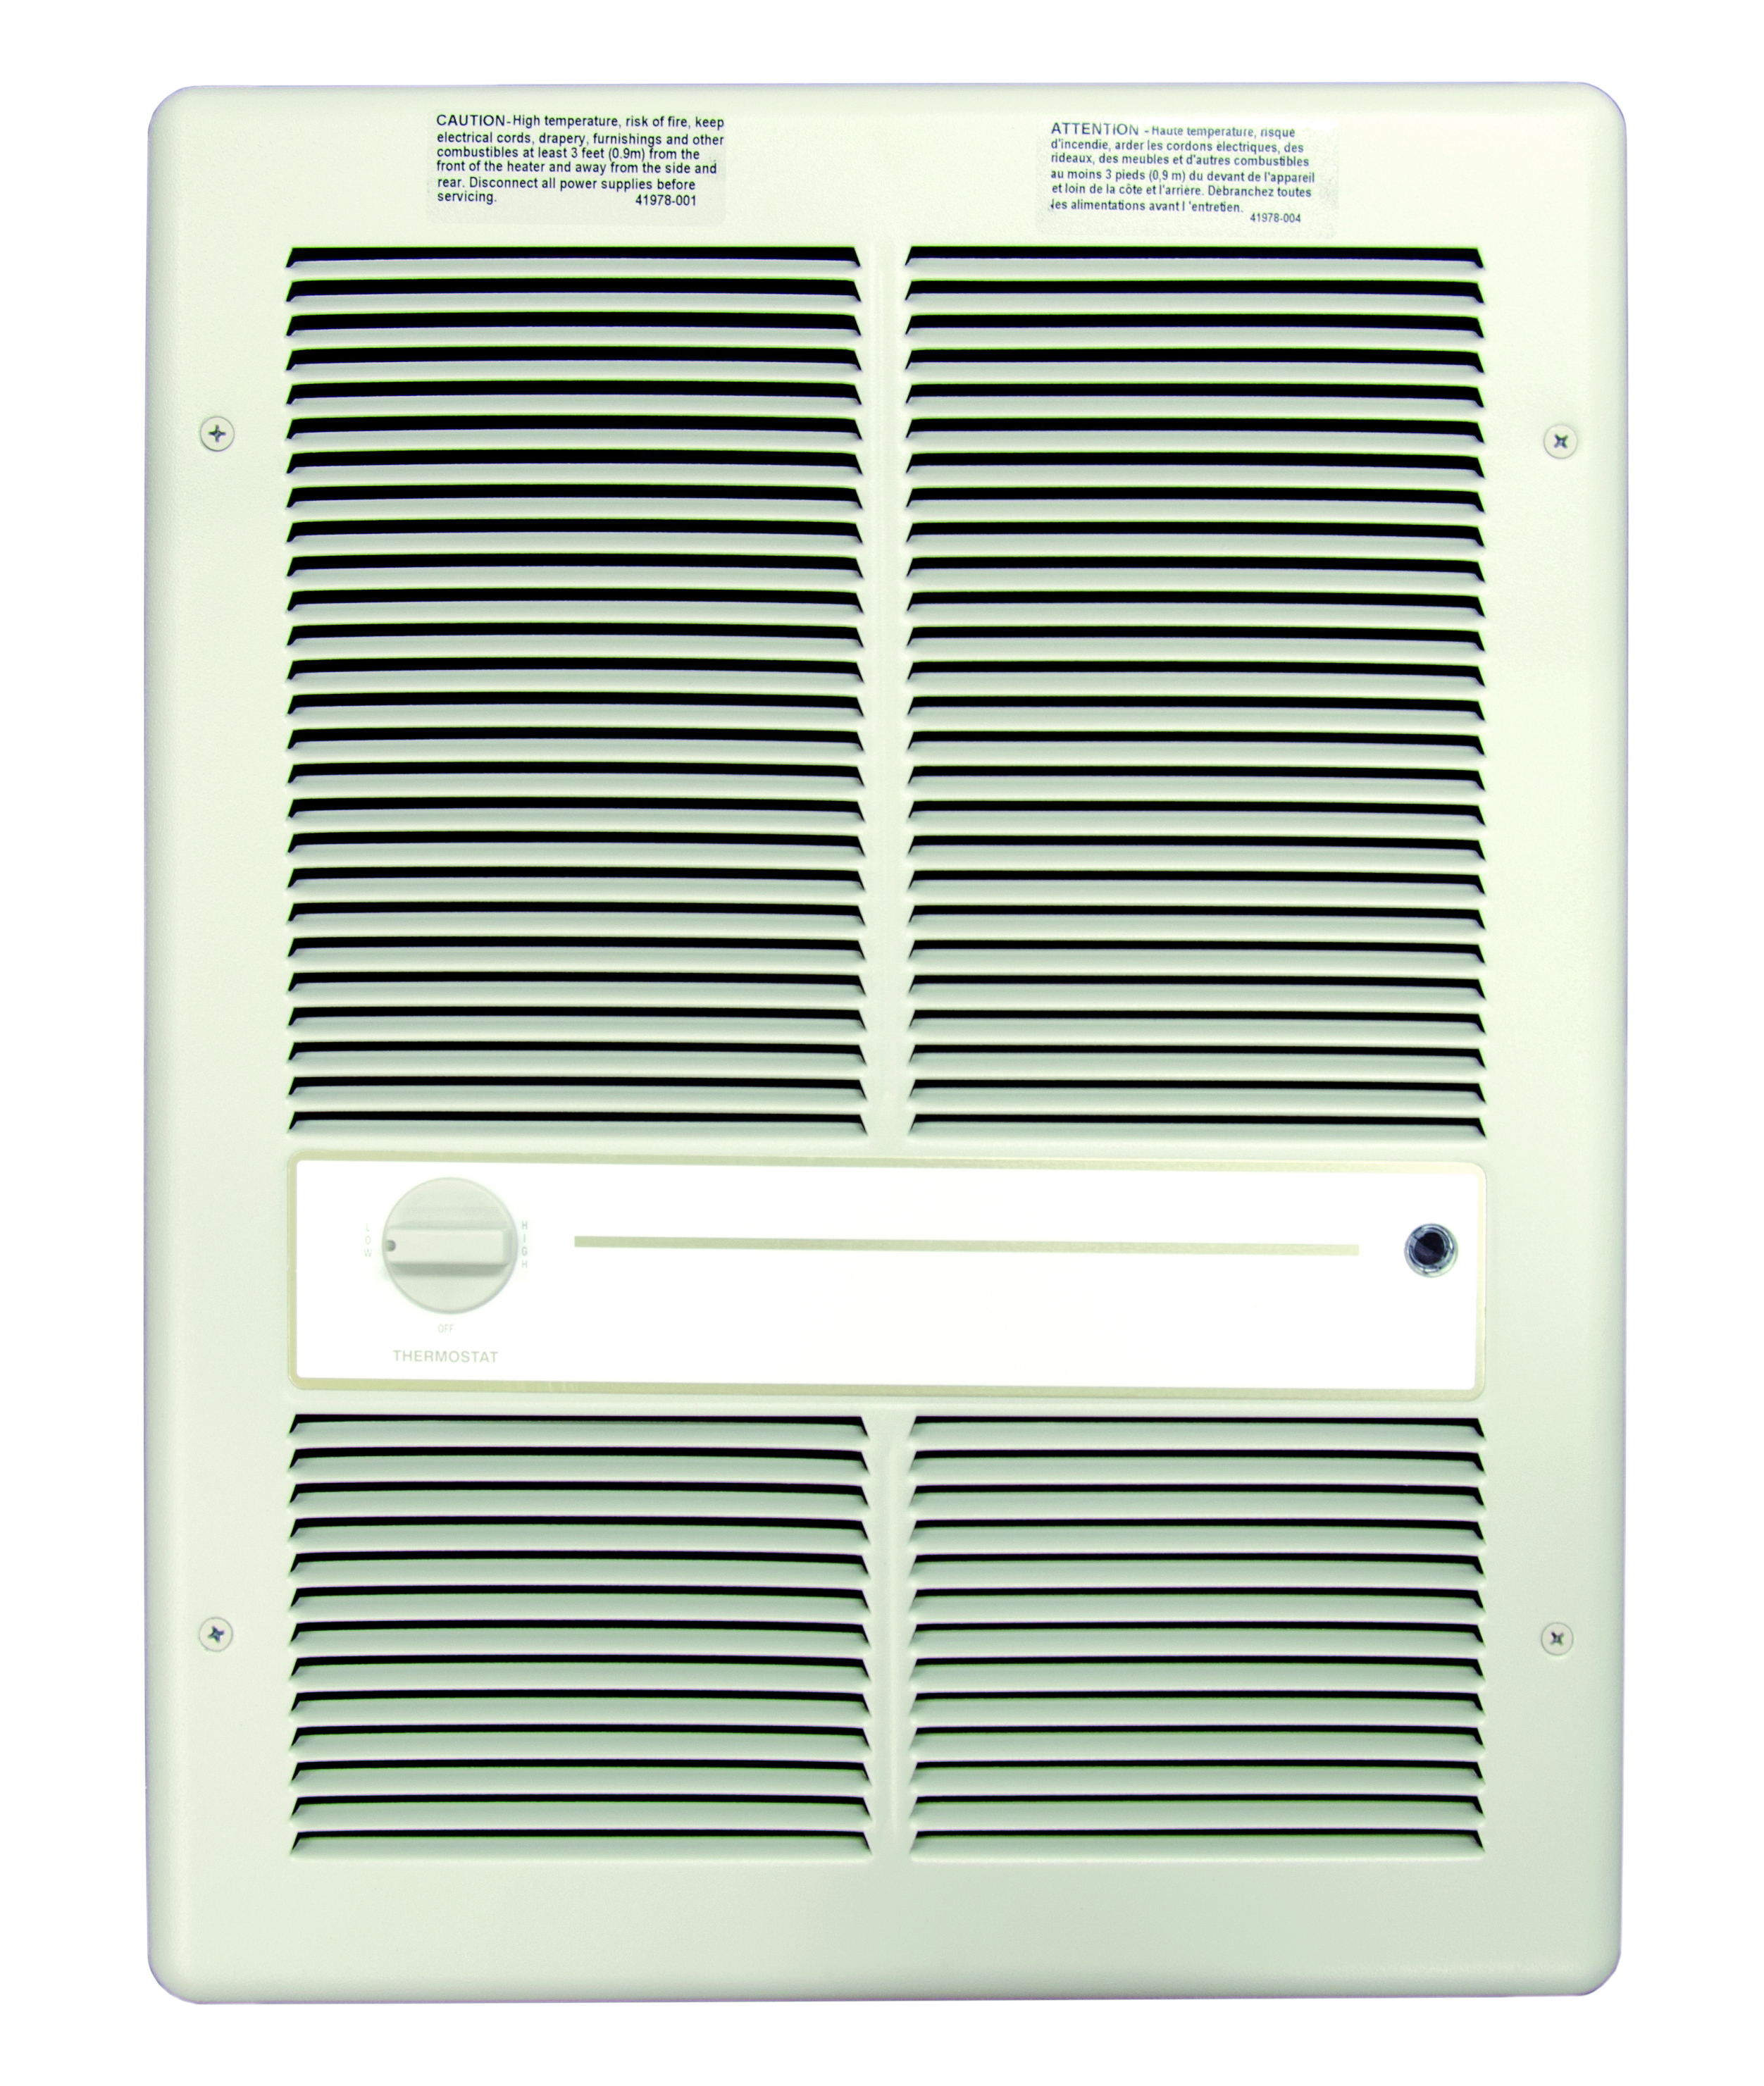 G3314RPW 686334326858 Fan Forced Wall Heater, Maximum Operating Temperature- 90 (Thermostat) DEG F 1 PH, 2000 WTT, 277 V, Wall Mounting, Steel Housing Material, Dimensions- 14-3/16 Width X 19-15/16 Height X 4 Depth IN, BTU Rating- 6826, 7.2 AMP, No Built-In Thermostat, White